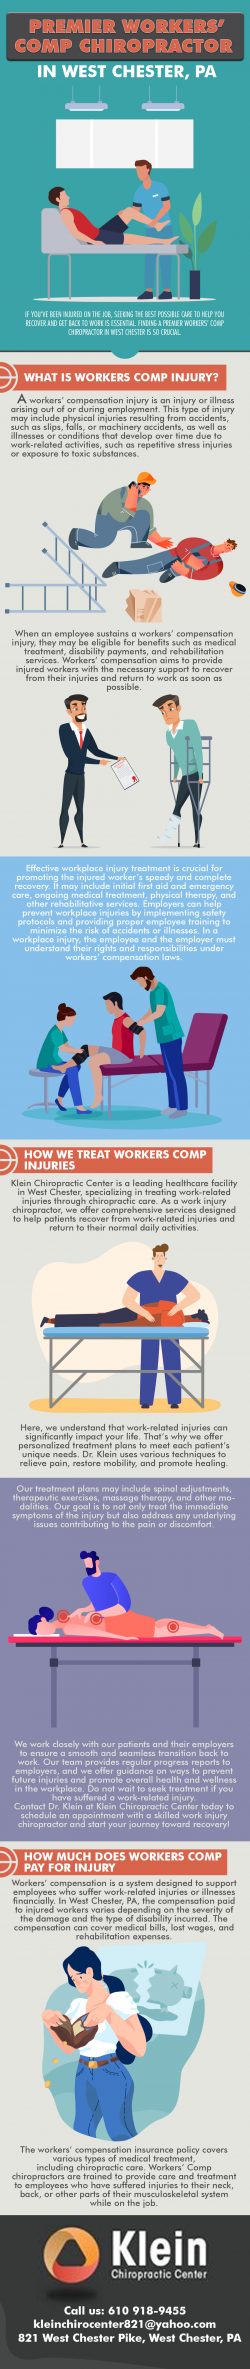 Workers’ Compensation Chiropractic Center